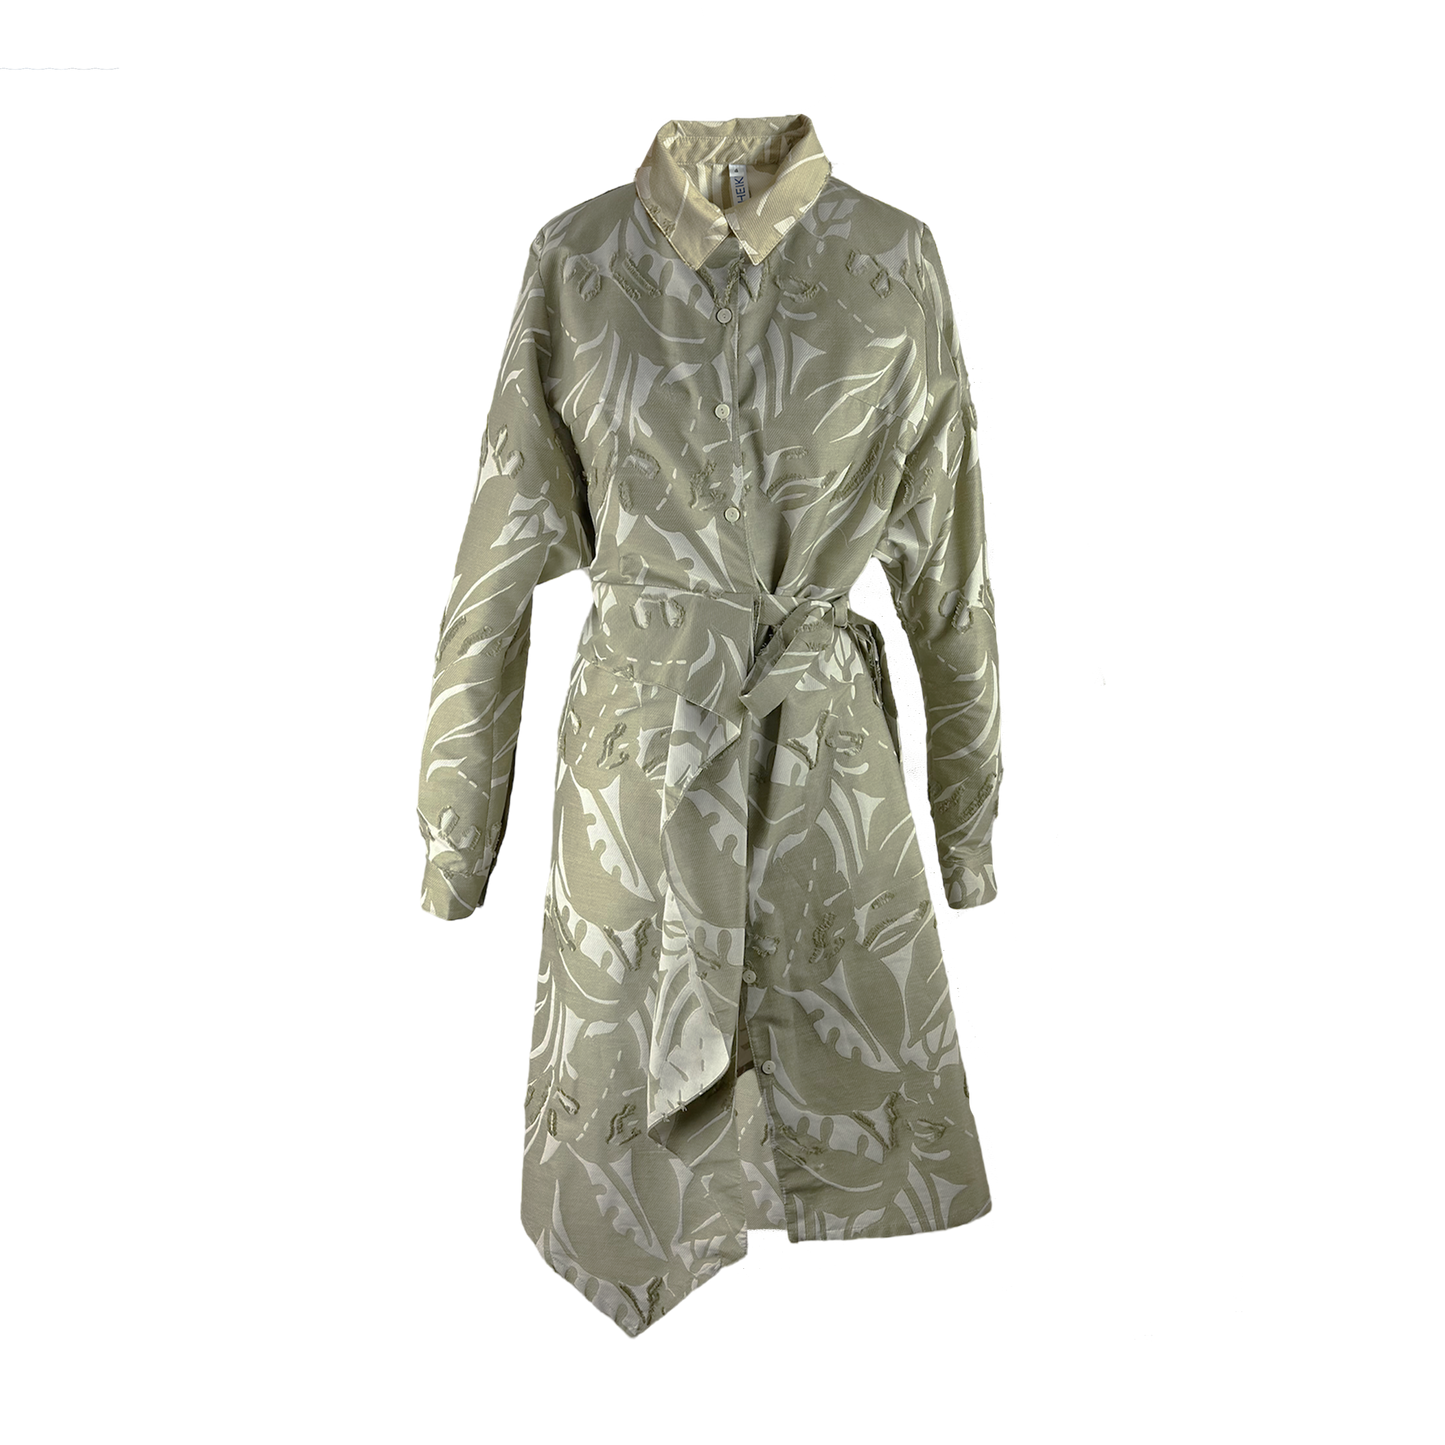 Seige shirt dress with an eye-catching beige leaf print, with unusual drape detail in front and kimono-style sleeves